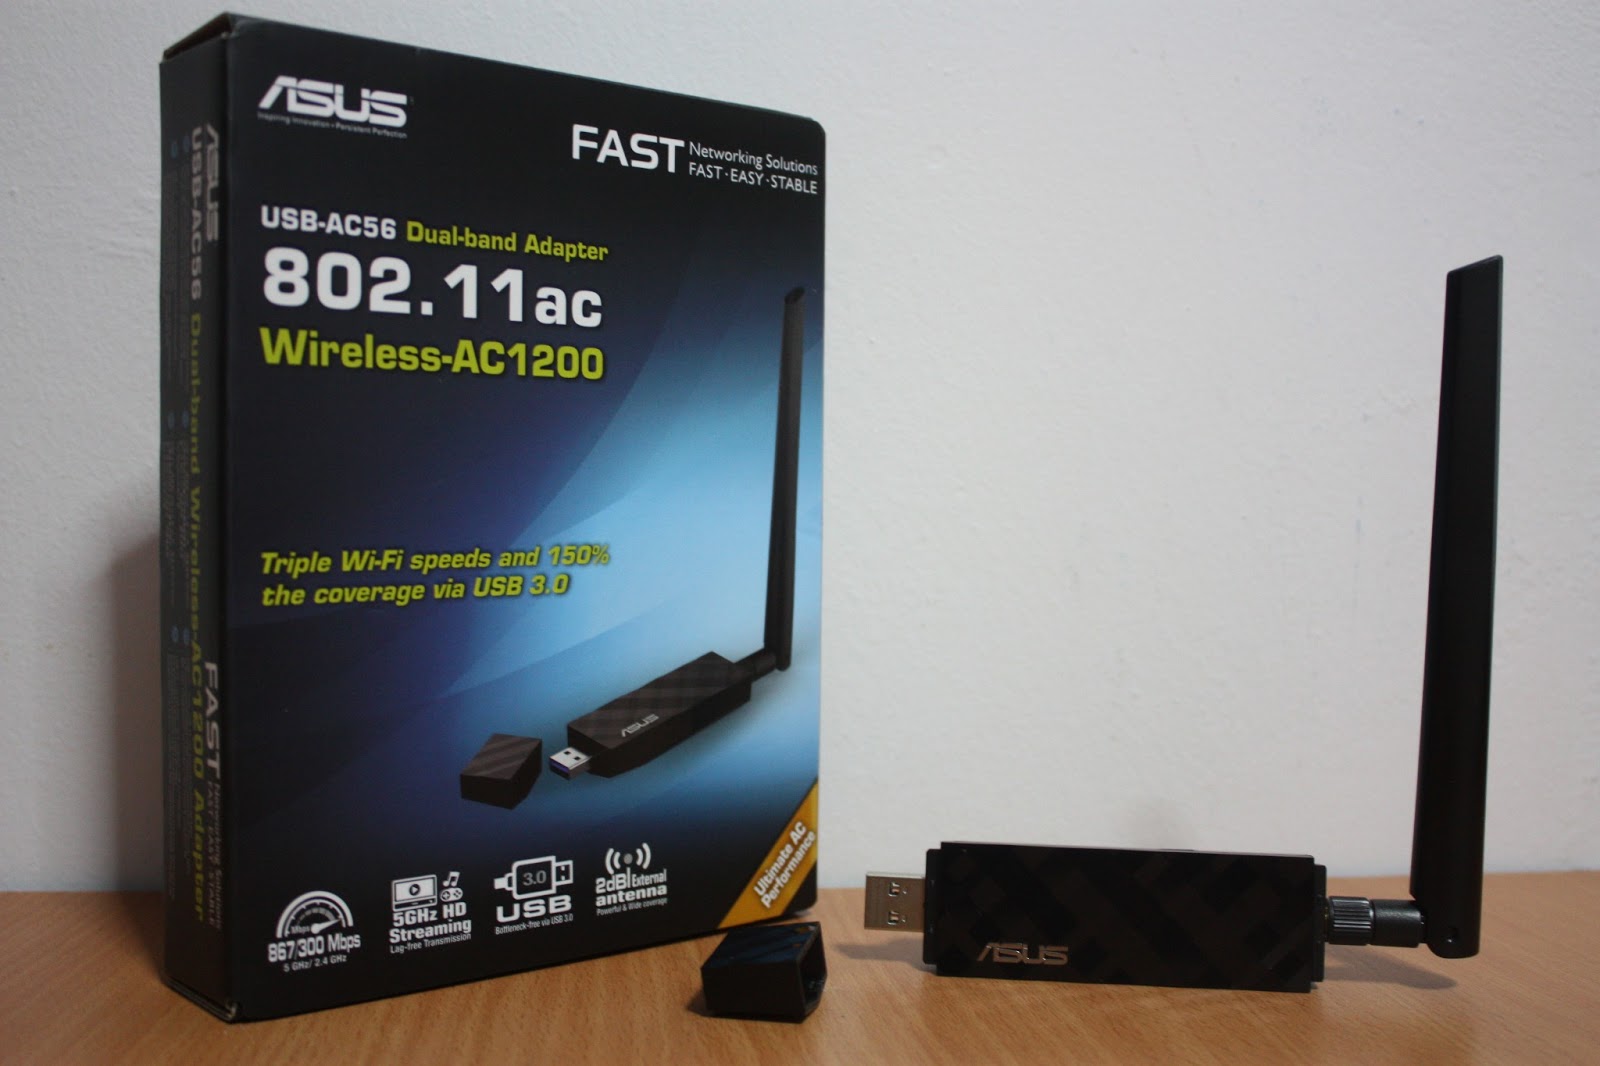 Wireless AC USB Dongle - ASUS USB-AC56 Dual-band Adapter - The Tech Revolutionist